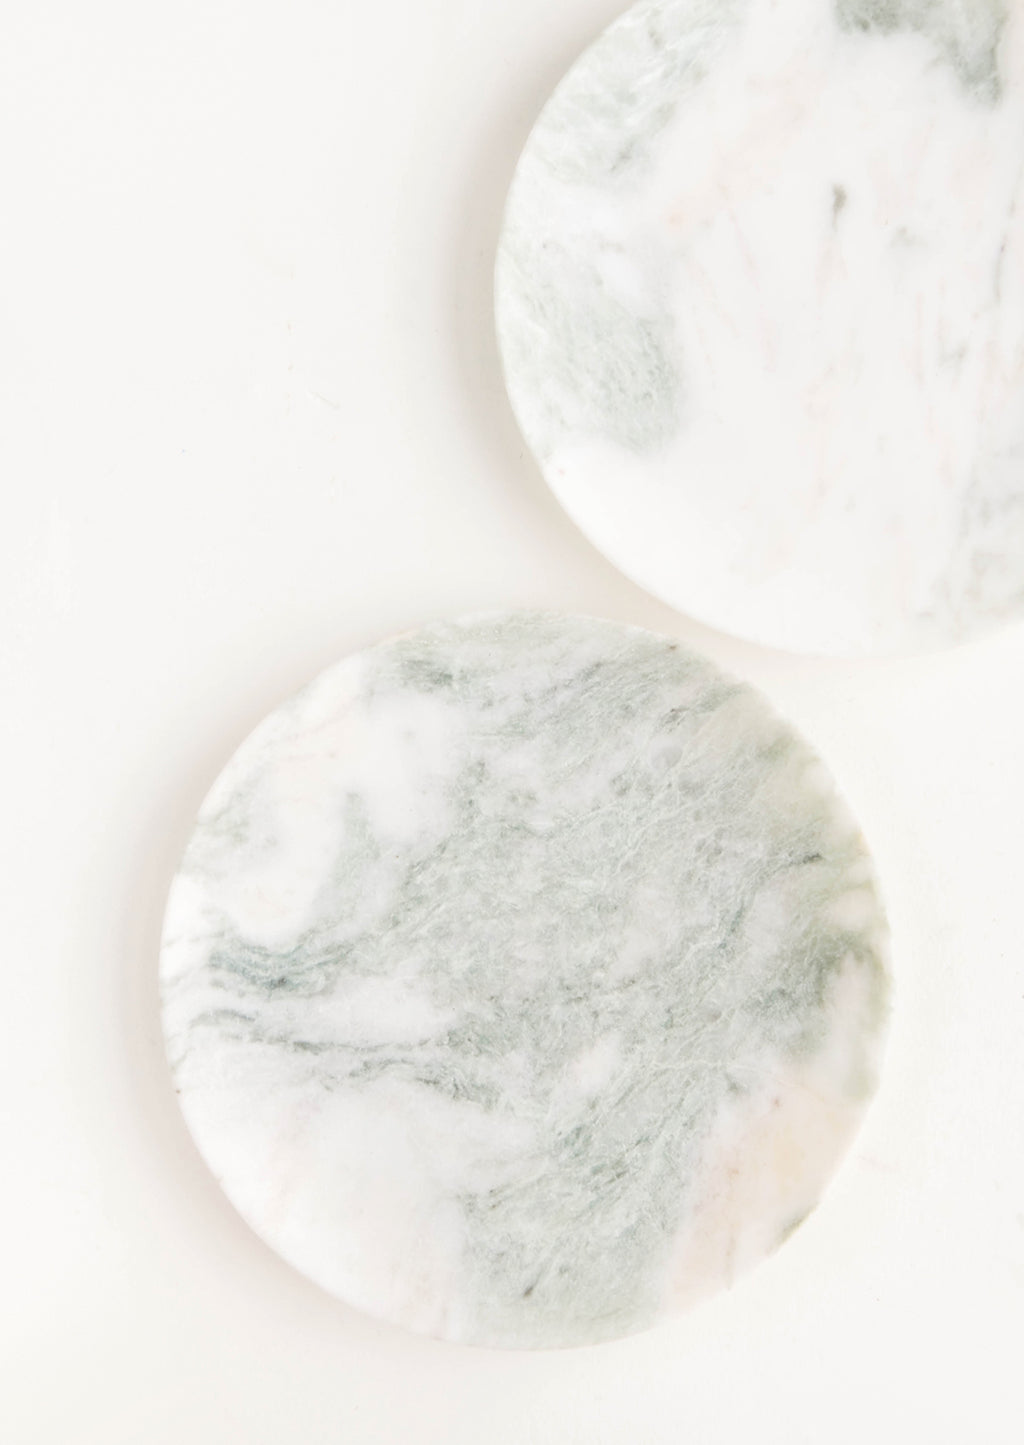 1: Round plates made from green and white marbled onyx